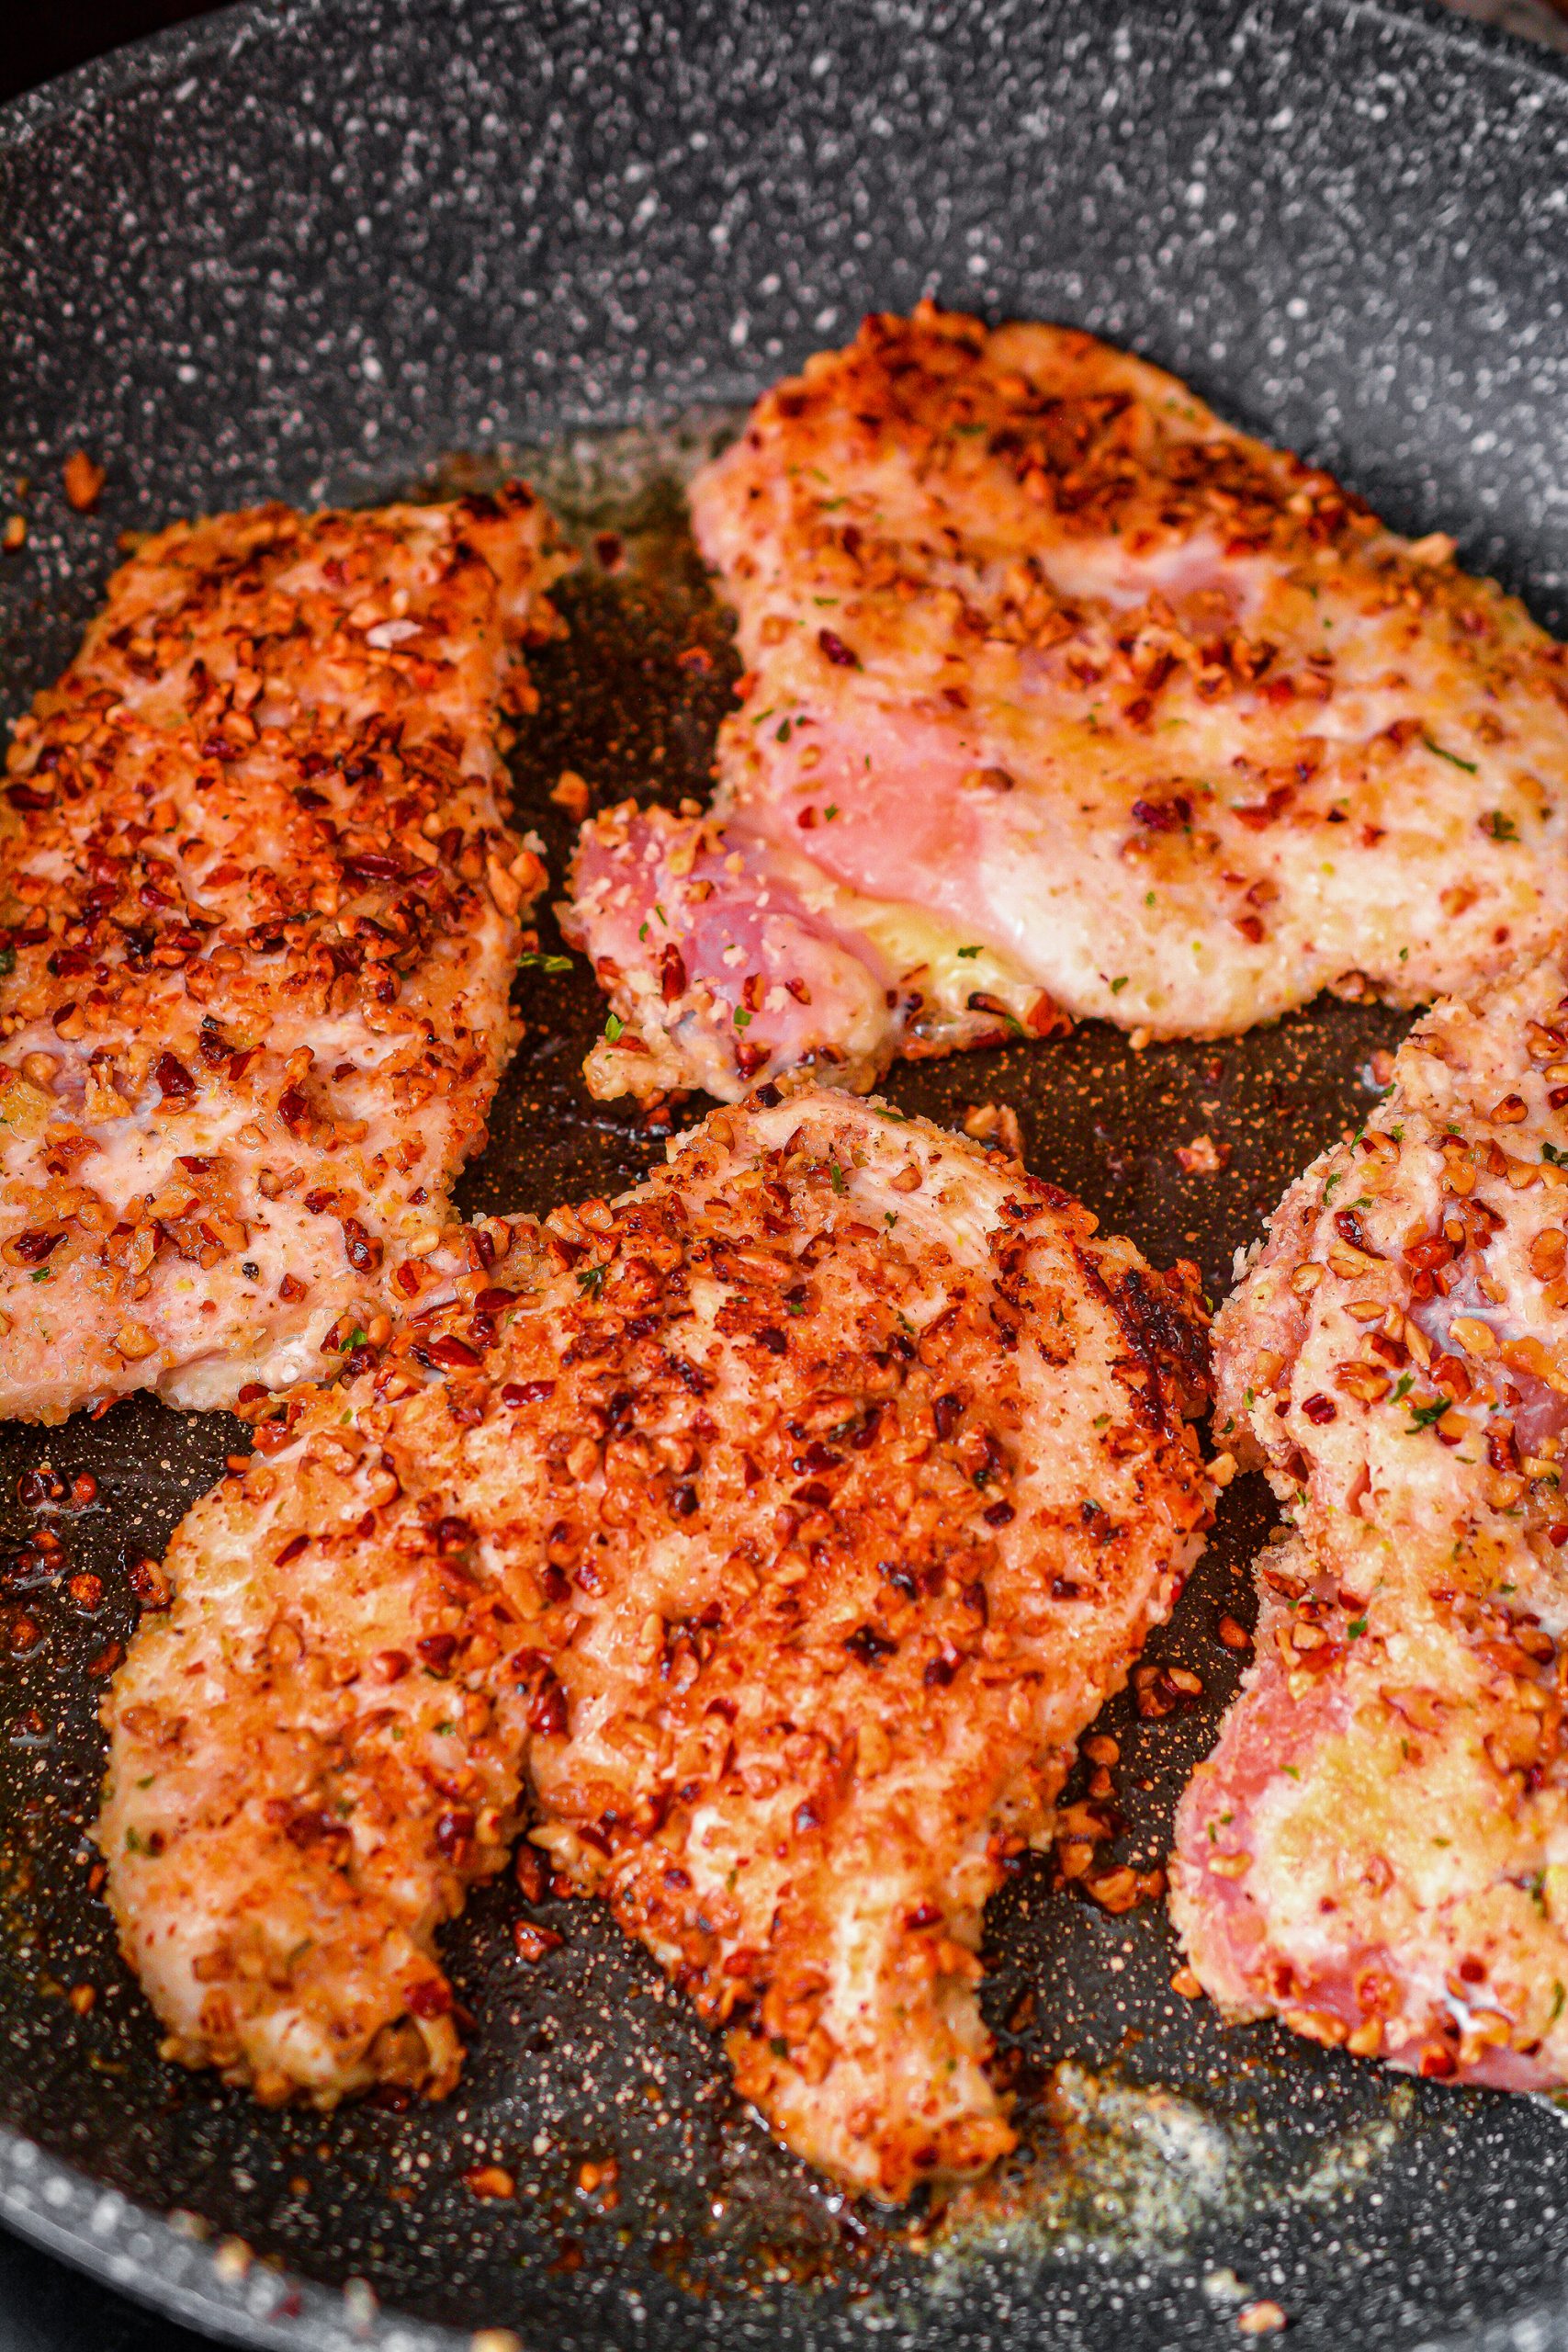 Sear the chicken for several minutes on each side until browned.